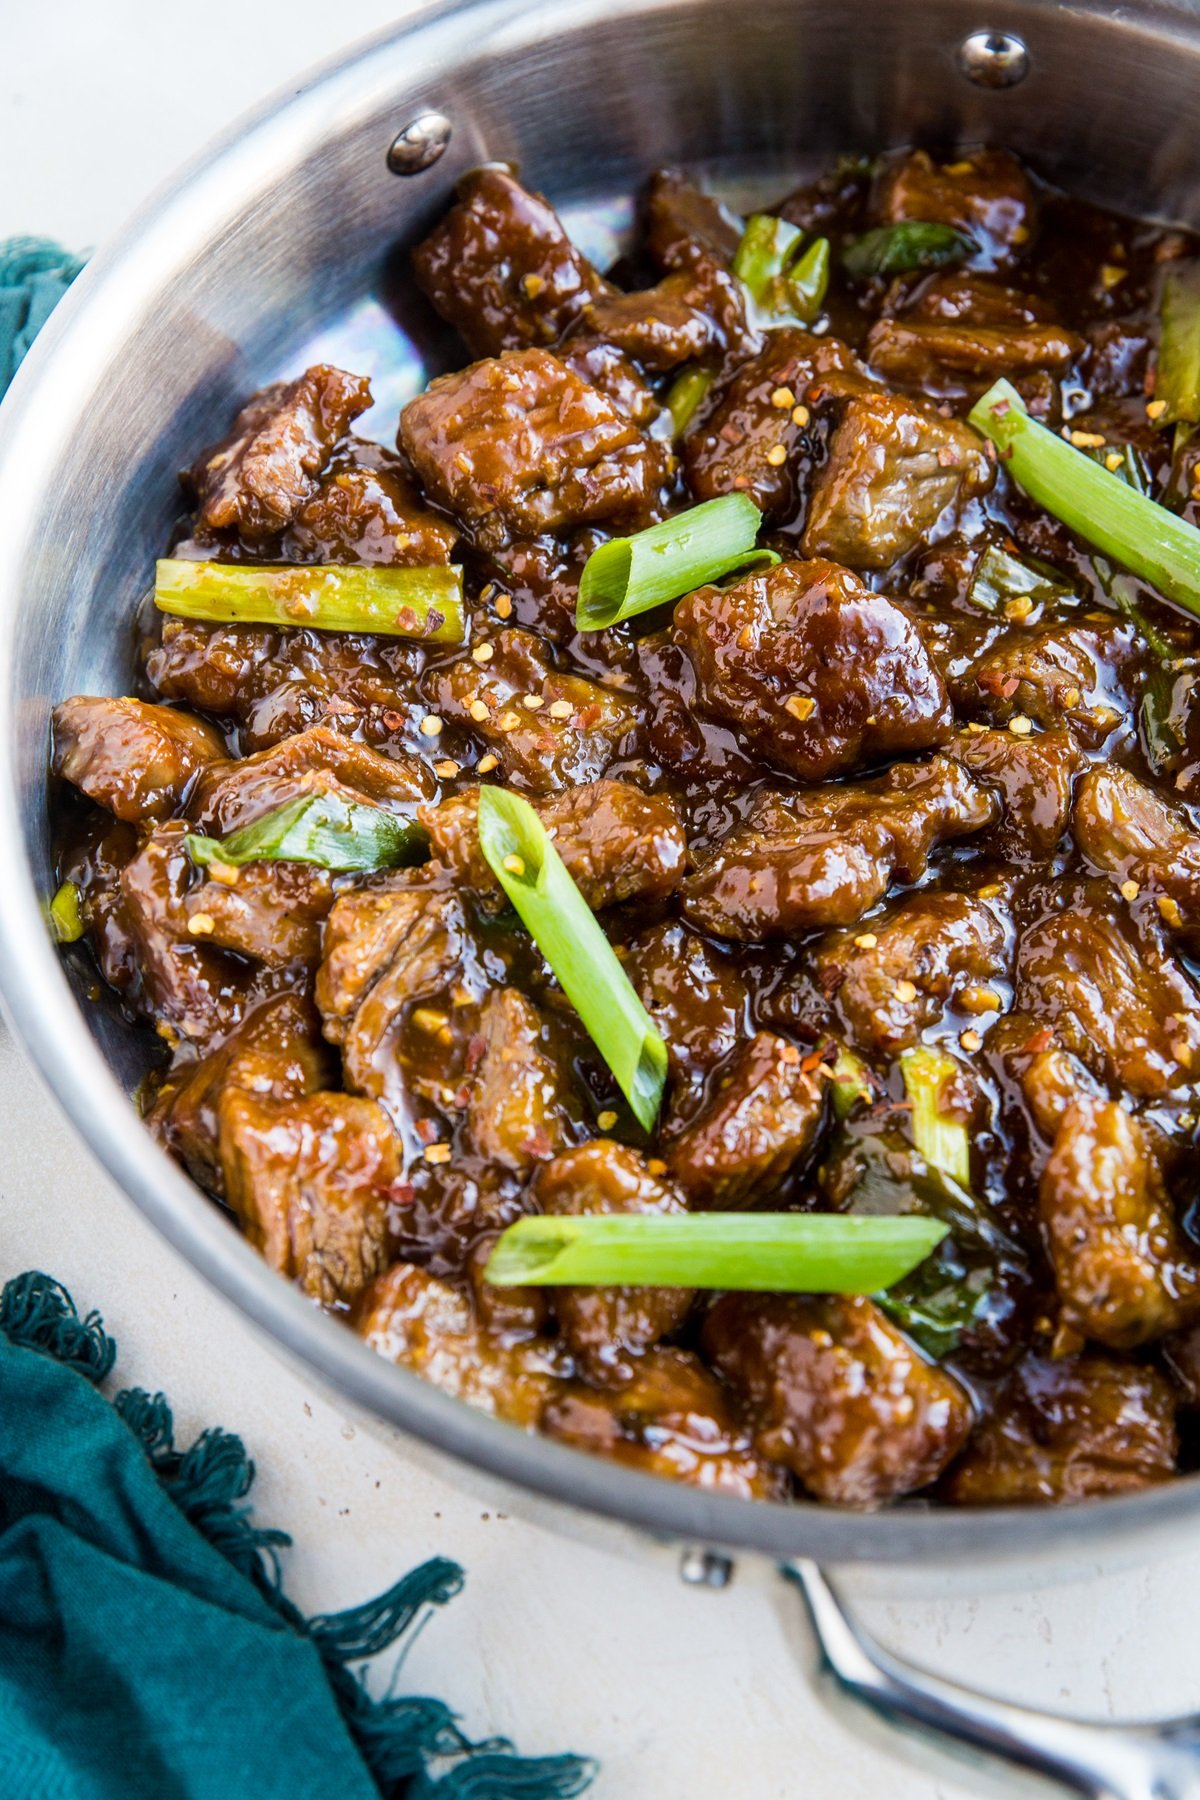 Stainless steel skillet full of healthy Mongolian beef with a blue napkin to the side. Ready to serve.